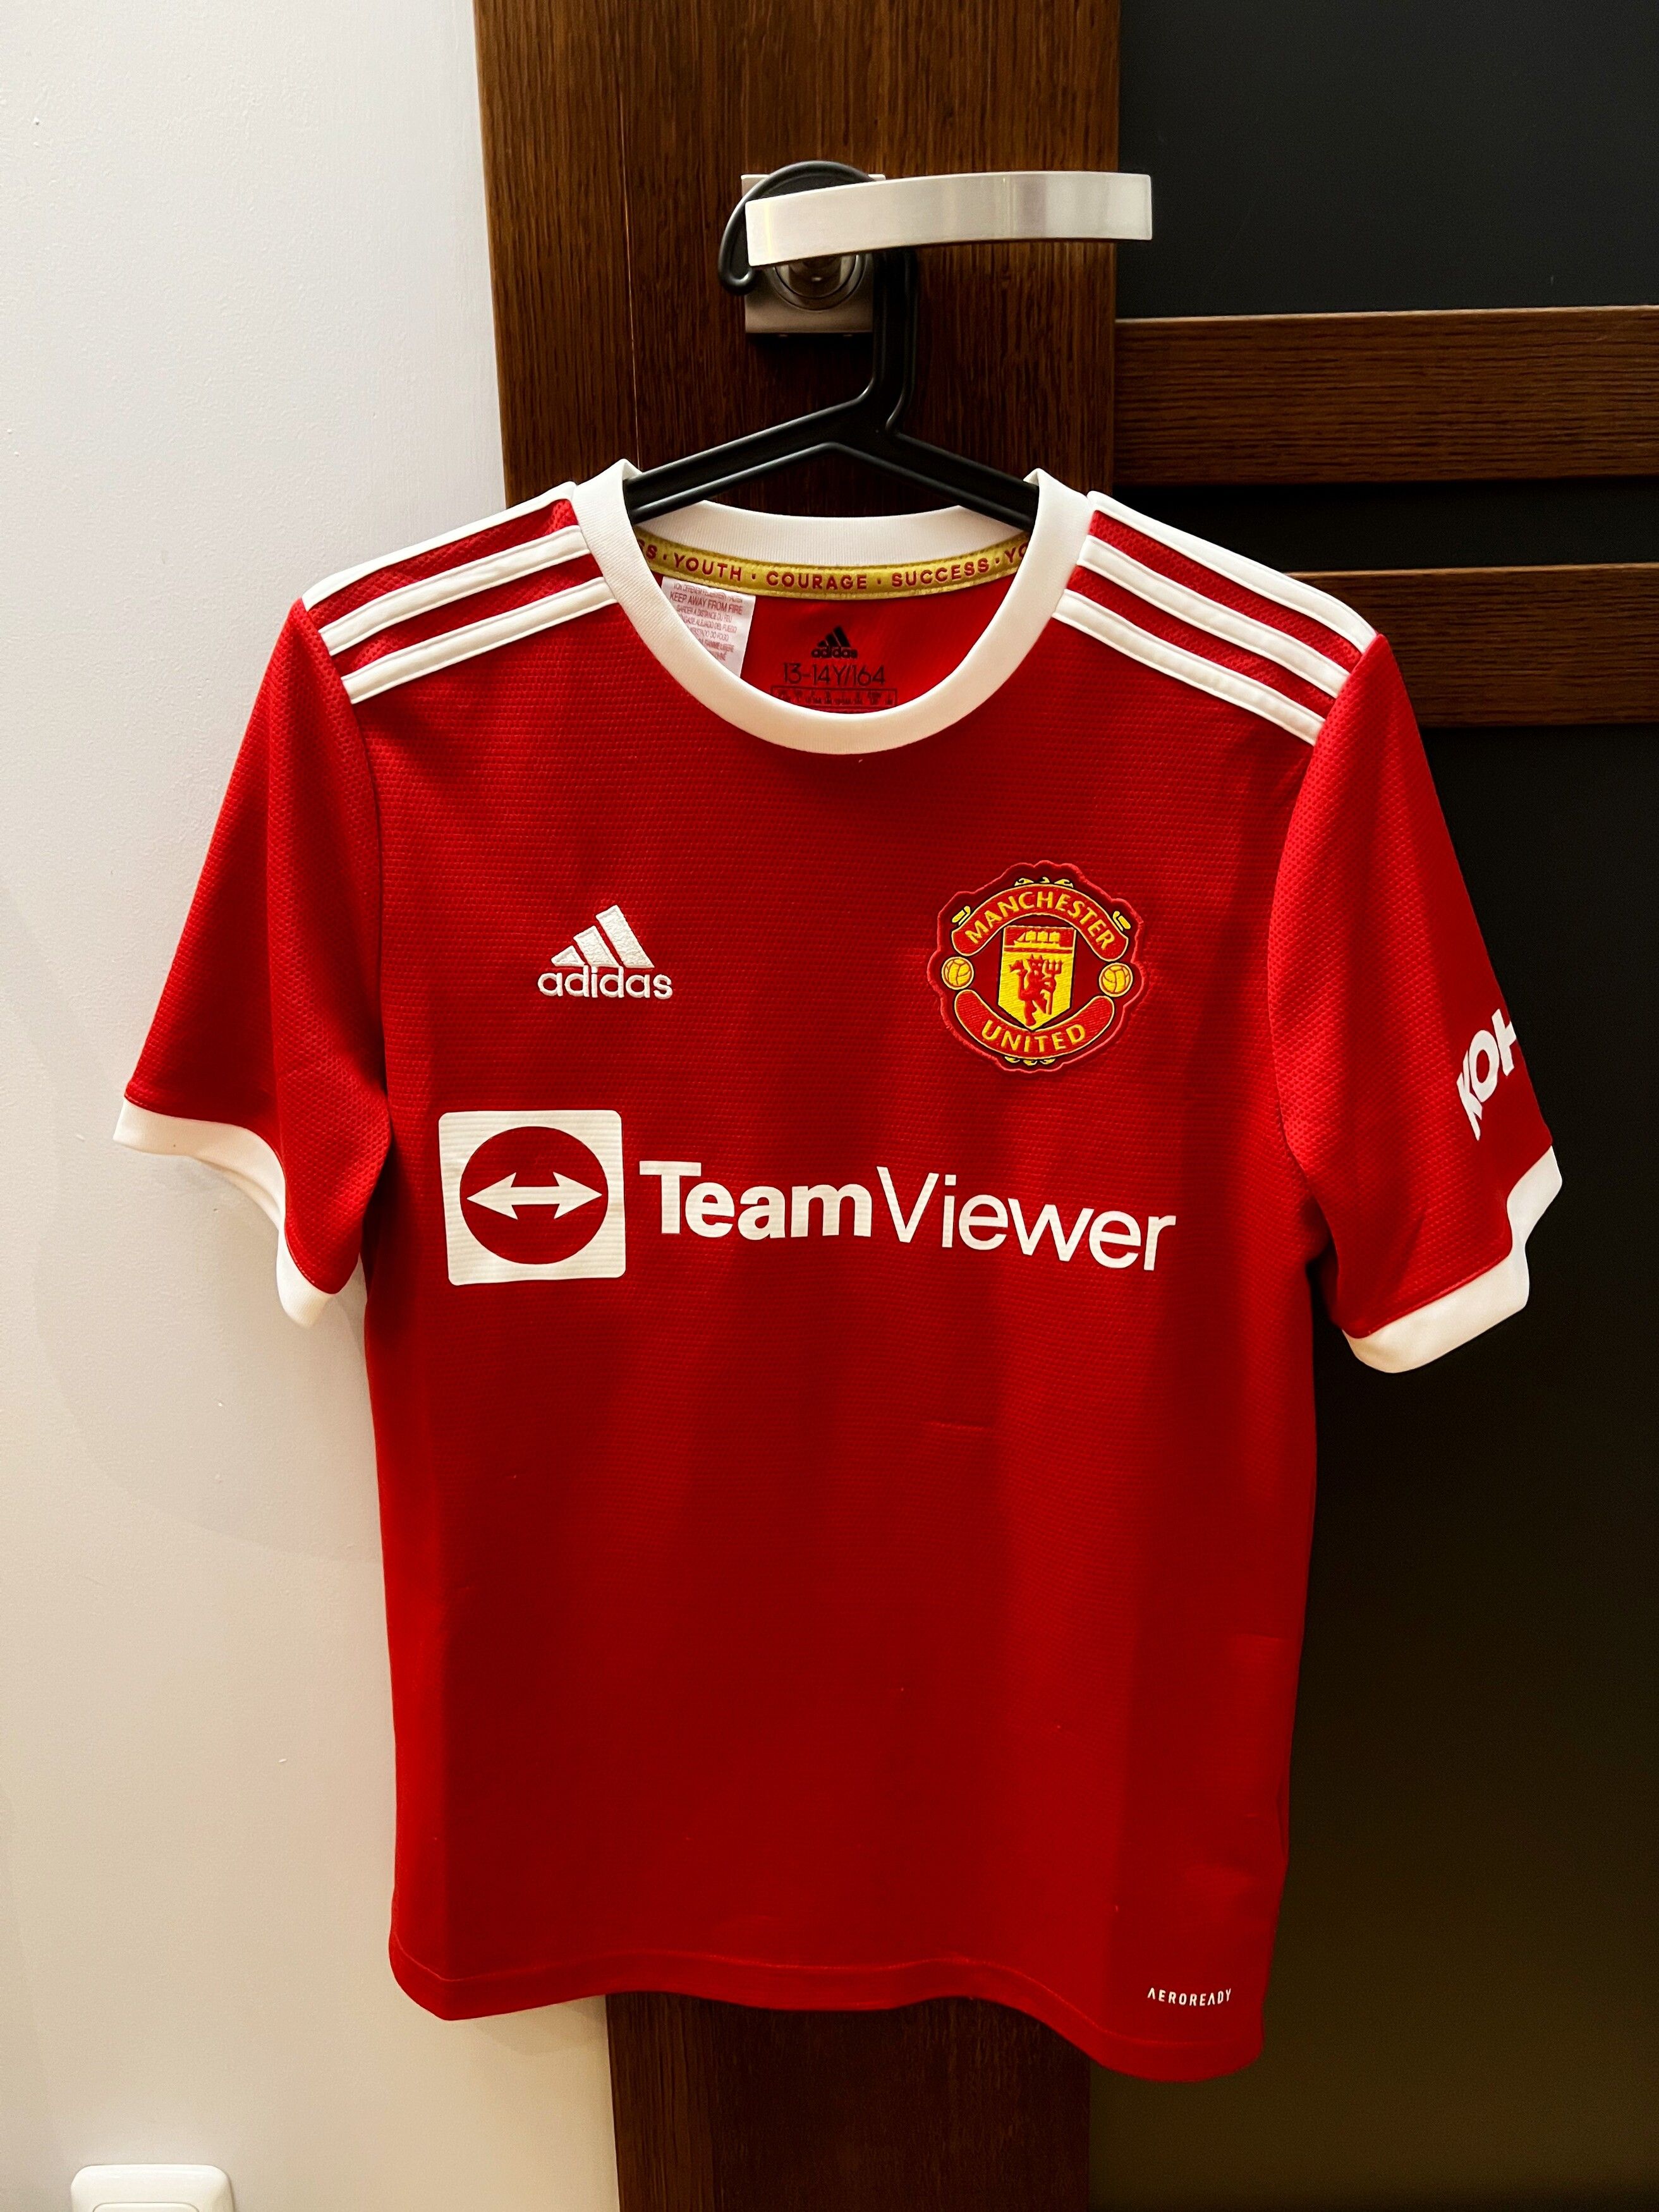 Adidas Adidas Manchester United Home Jersey fit S Size US S / EU 44-46 / 1 - 1 Preview